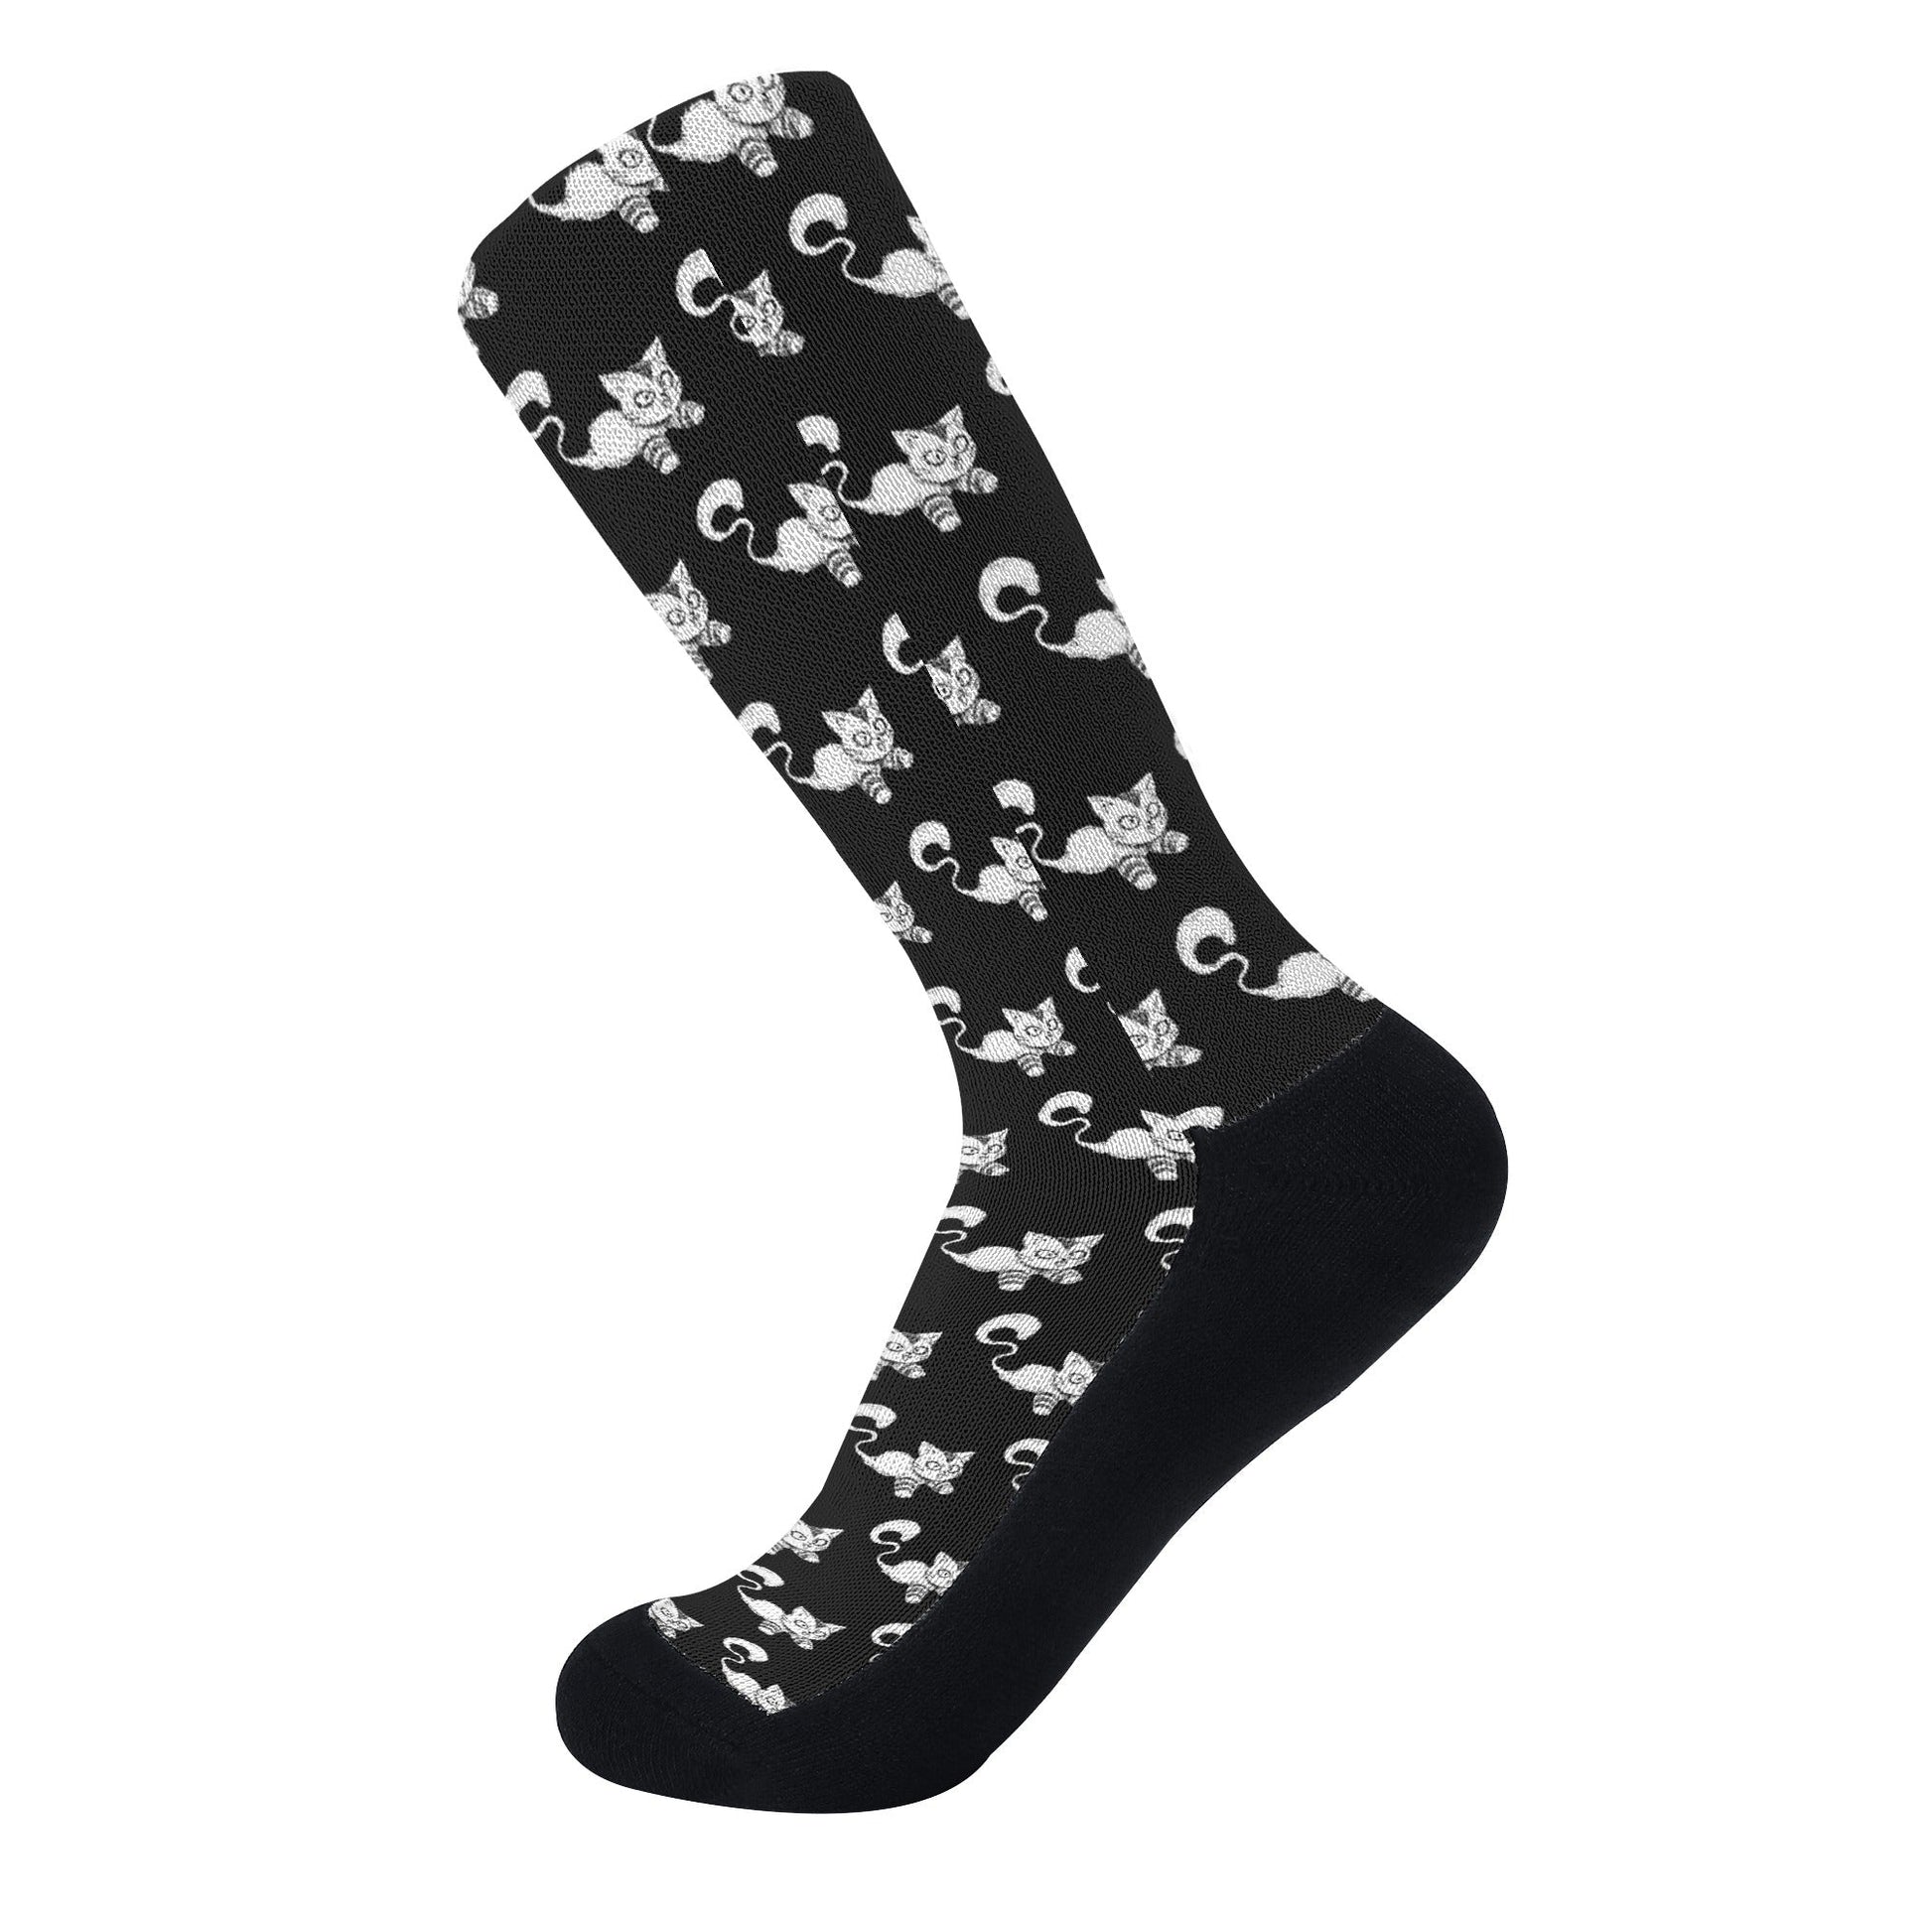 Stand out  with the  Socks  available at Hey Nugget. Grab yours today!